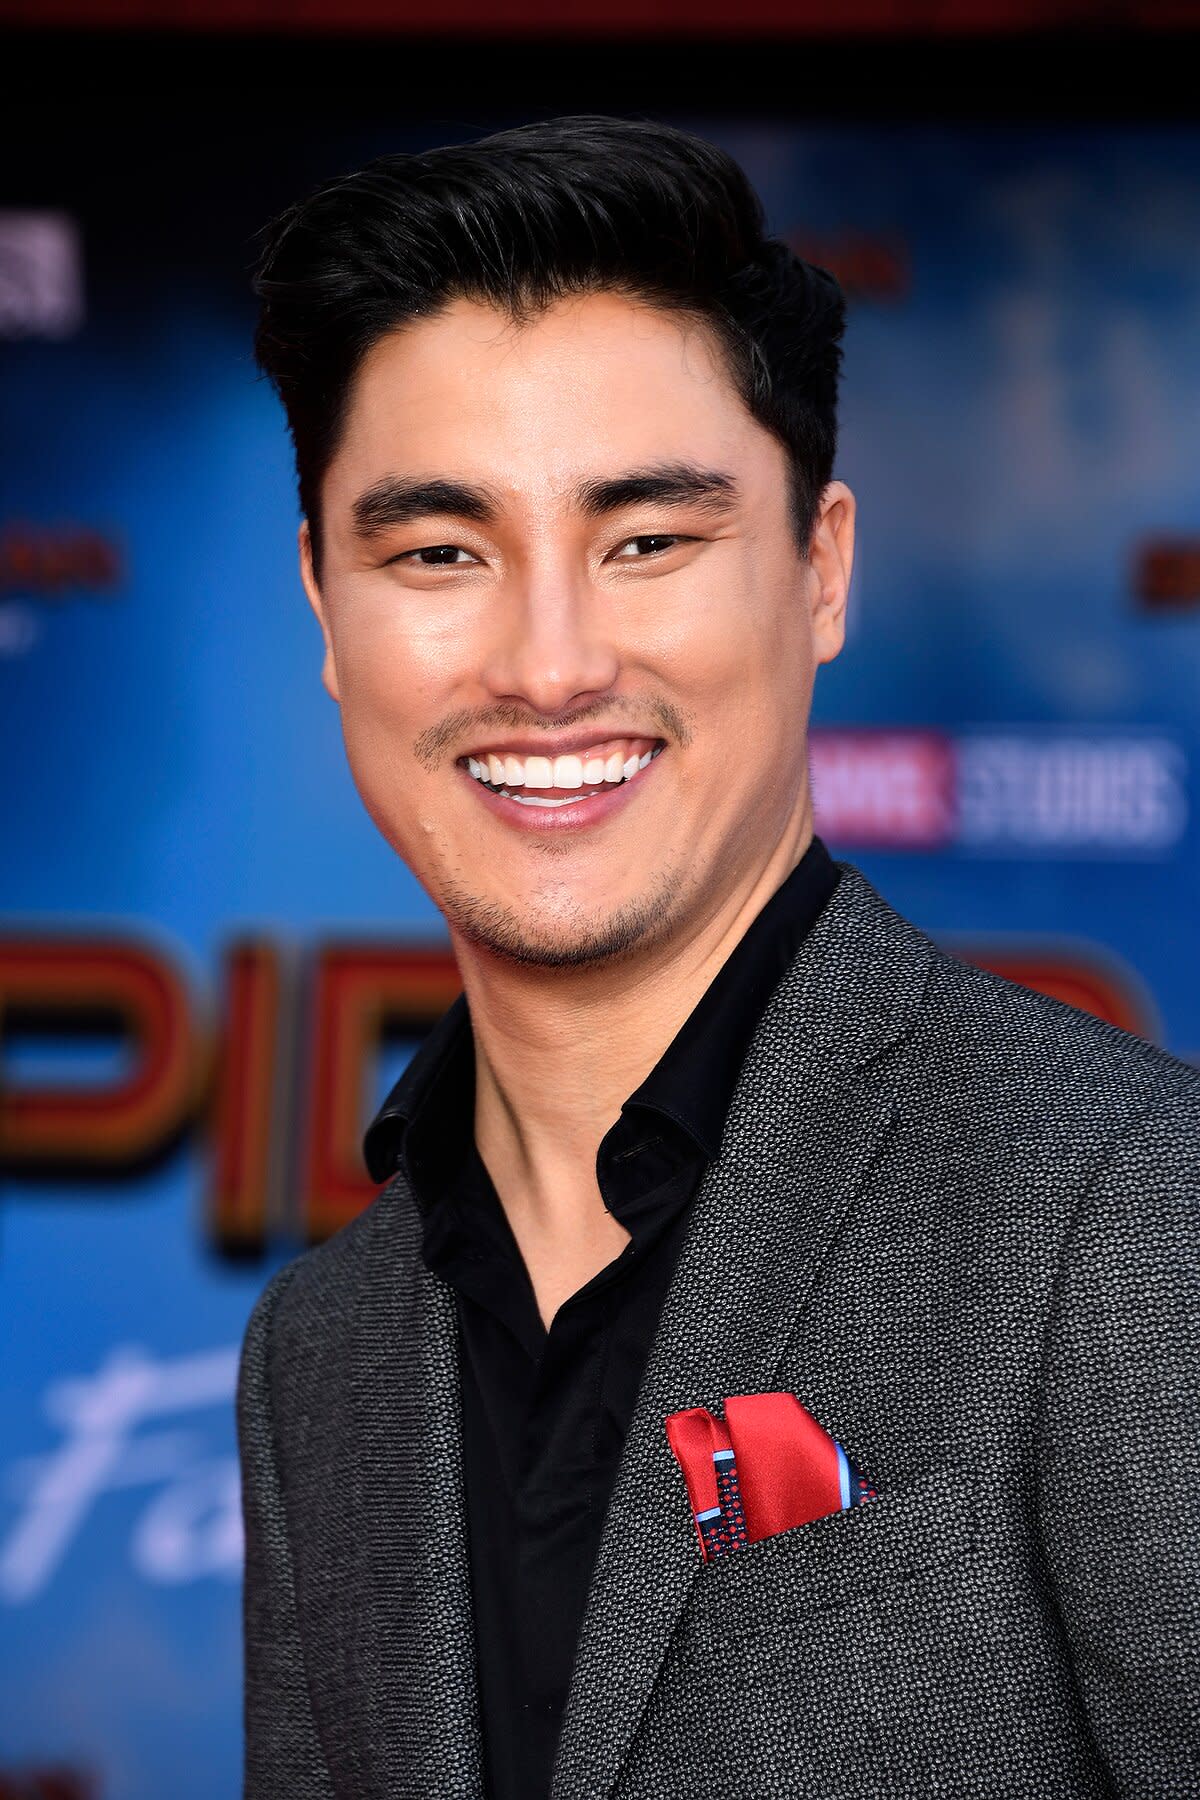 Remy Hii attends the Premiere Of Sony Pictures' "Spider-Man Far From Home" at TCL Chinese Theatre on June 26, 2019 in Hollywood, California